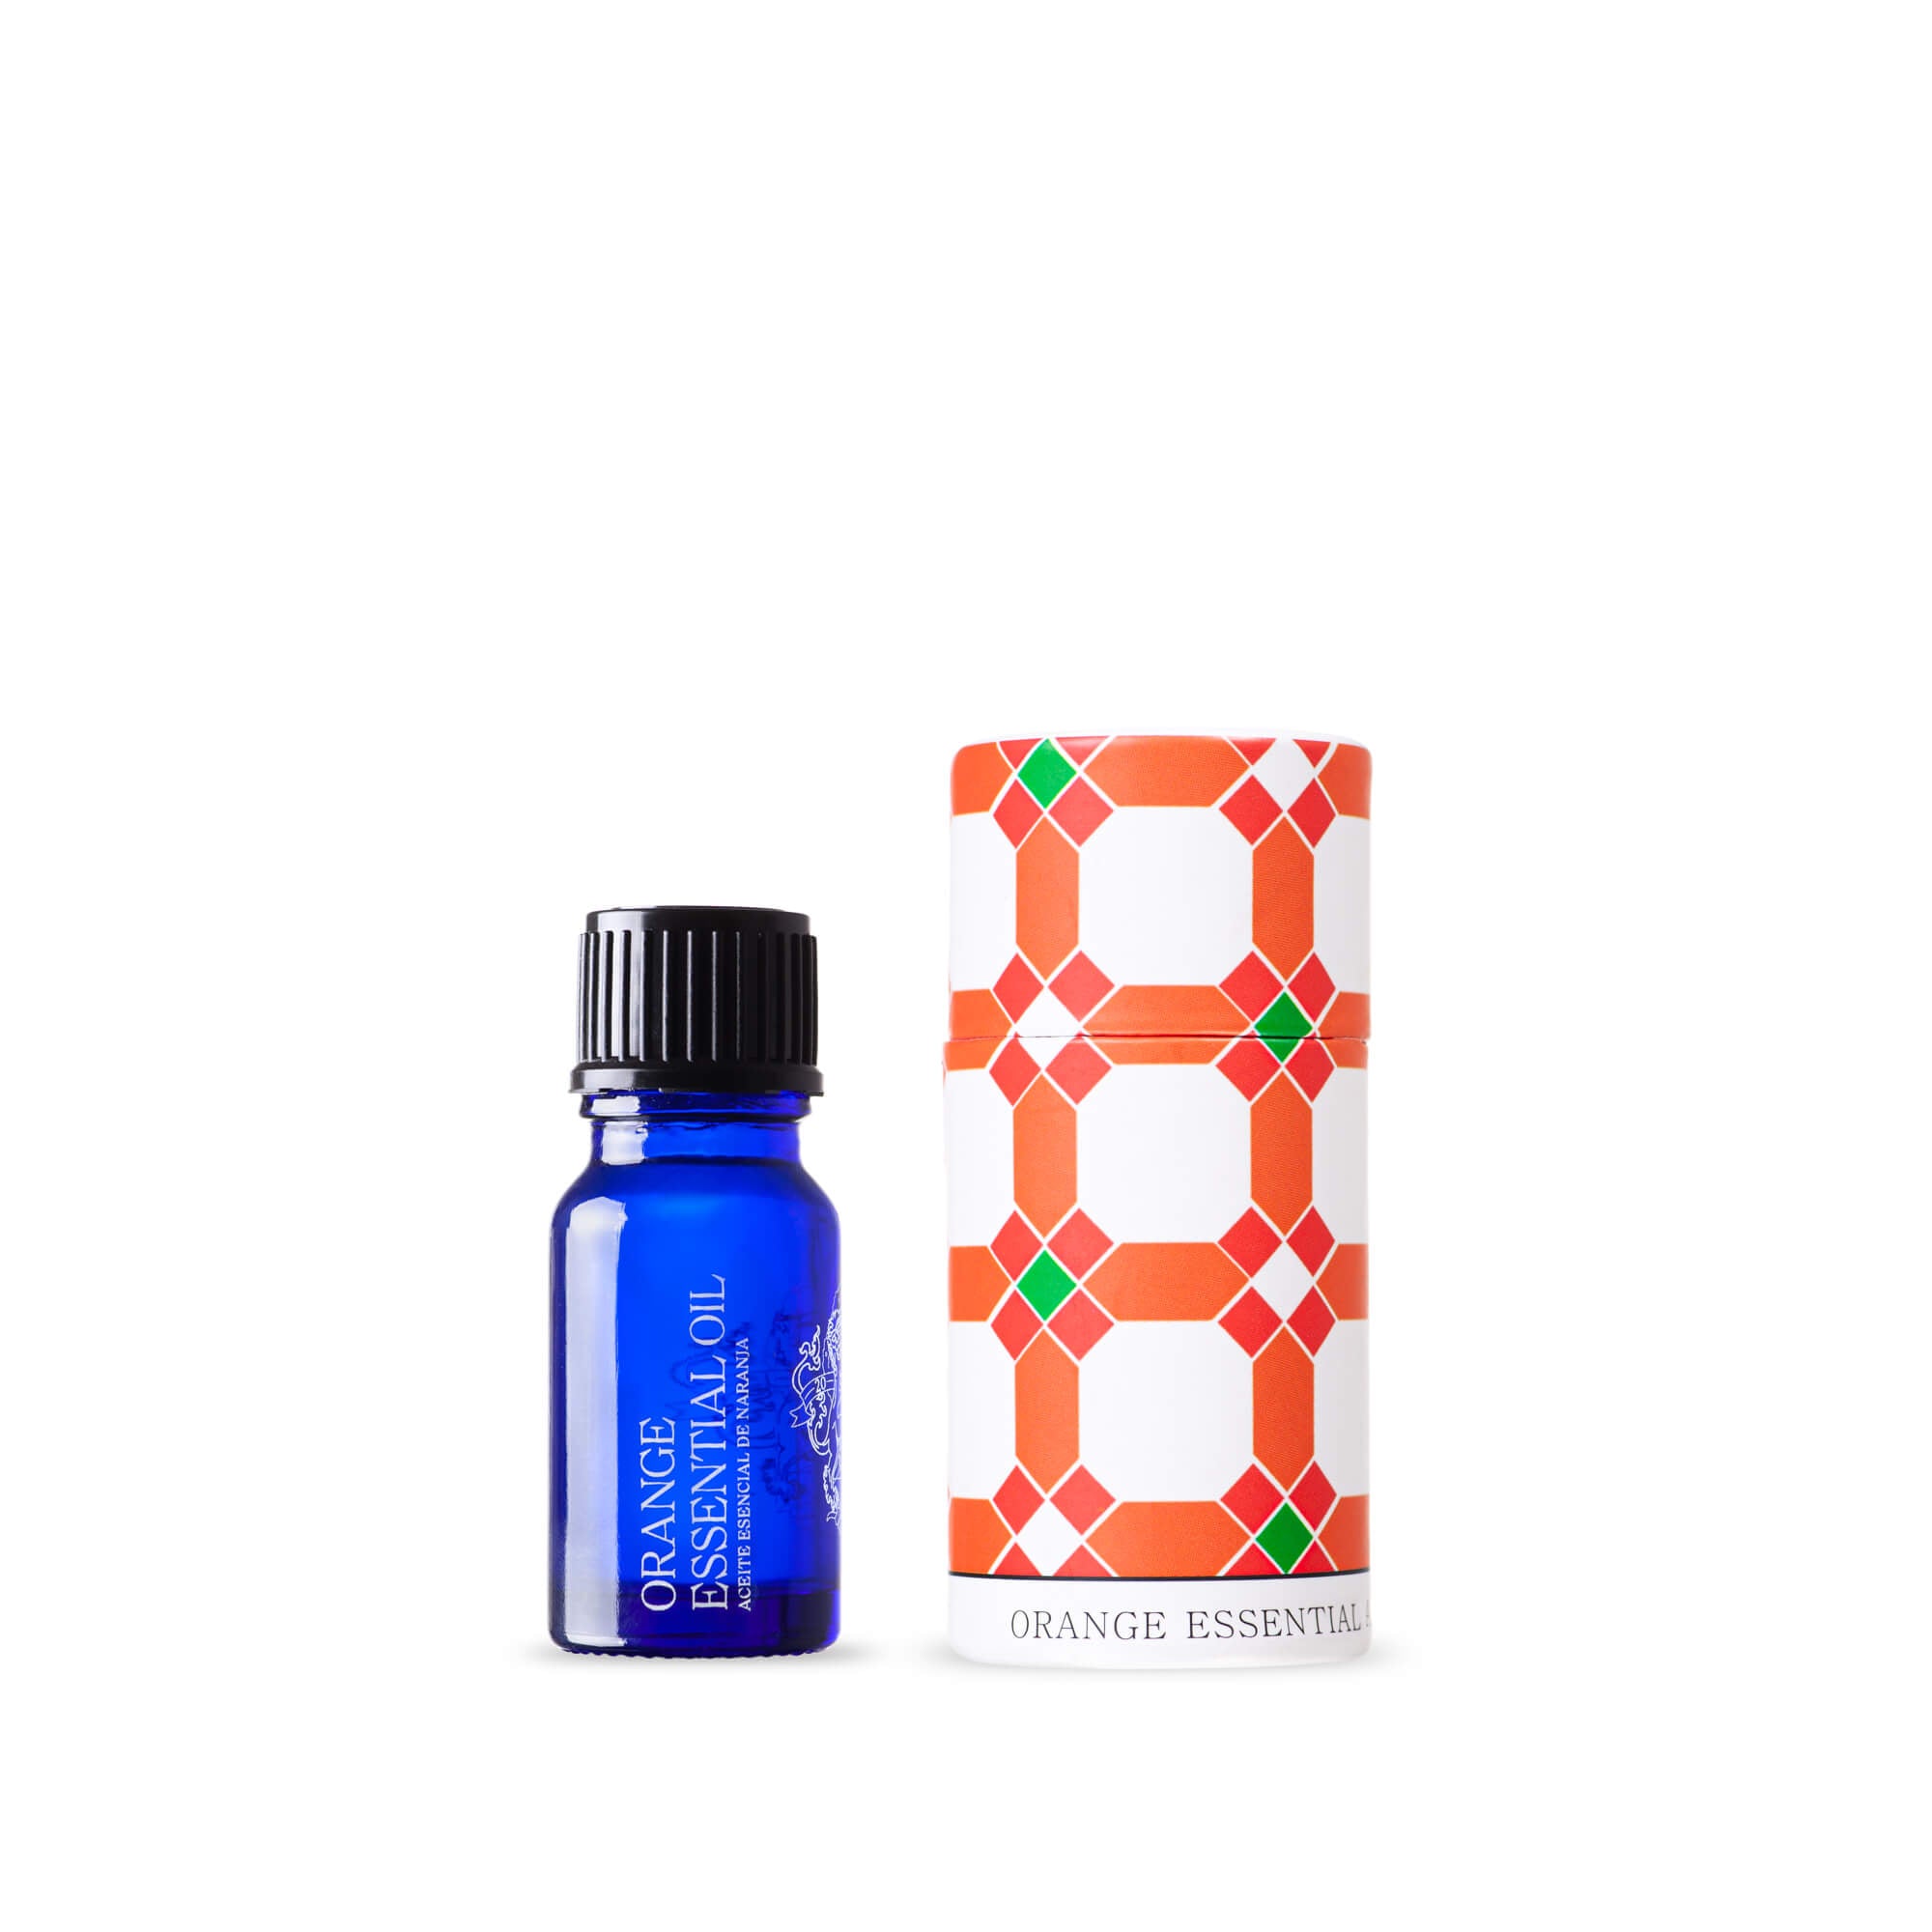 andaluz skincare orange essential oil. bright blue glass 10 milliliter bottle with a black cap. it comes in a brightly colored round box with a lid. the design is inspired from the tiles at the alhambra palace in granada spain